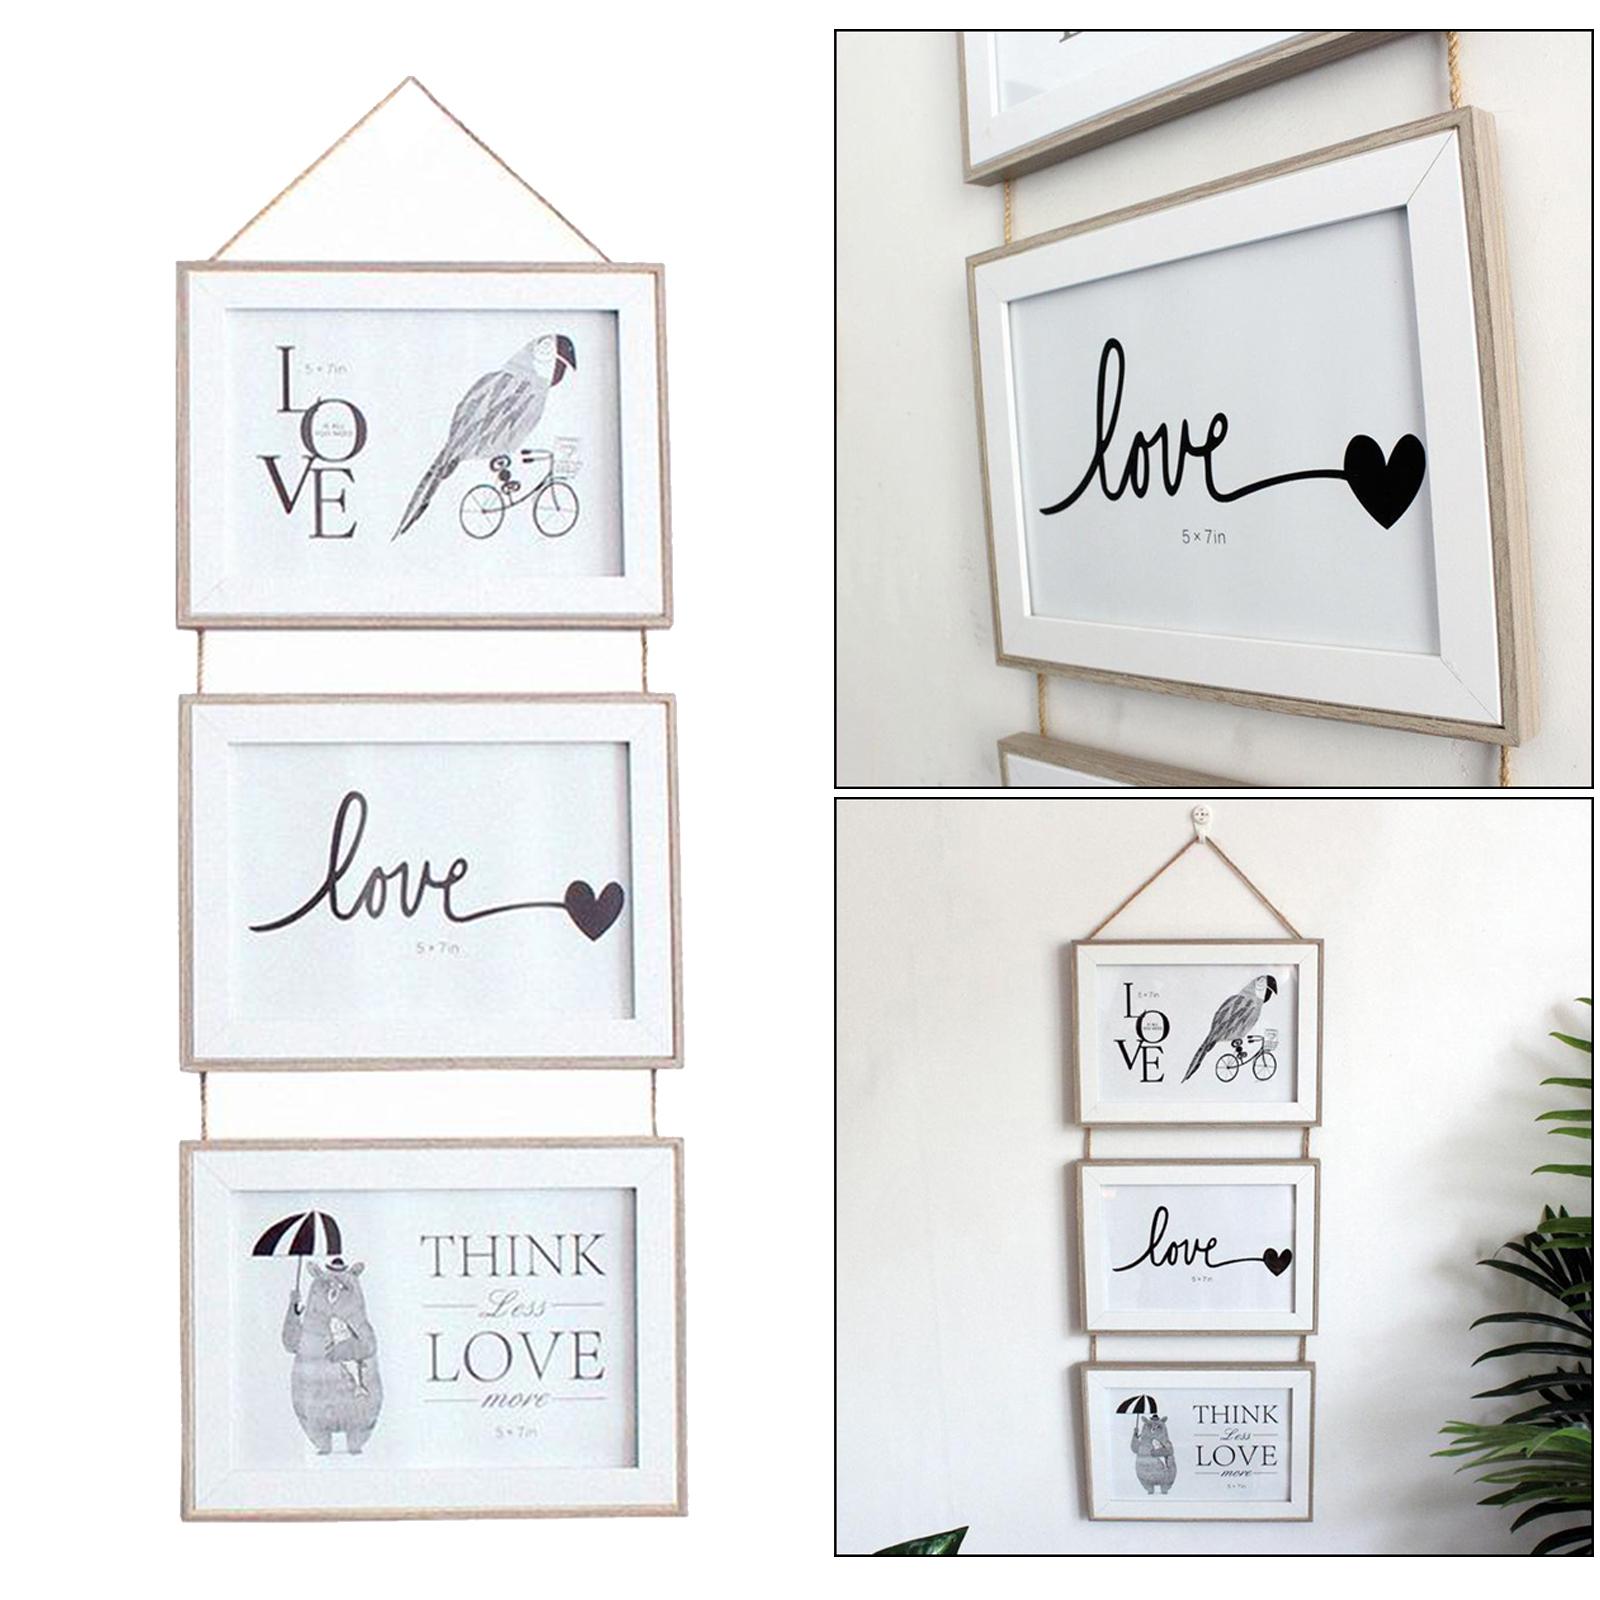 3x 4x6 inch / 5x7 inch Picture Frames for Wall Hanging 7 inch  light gray